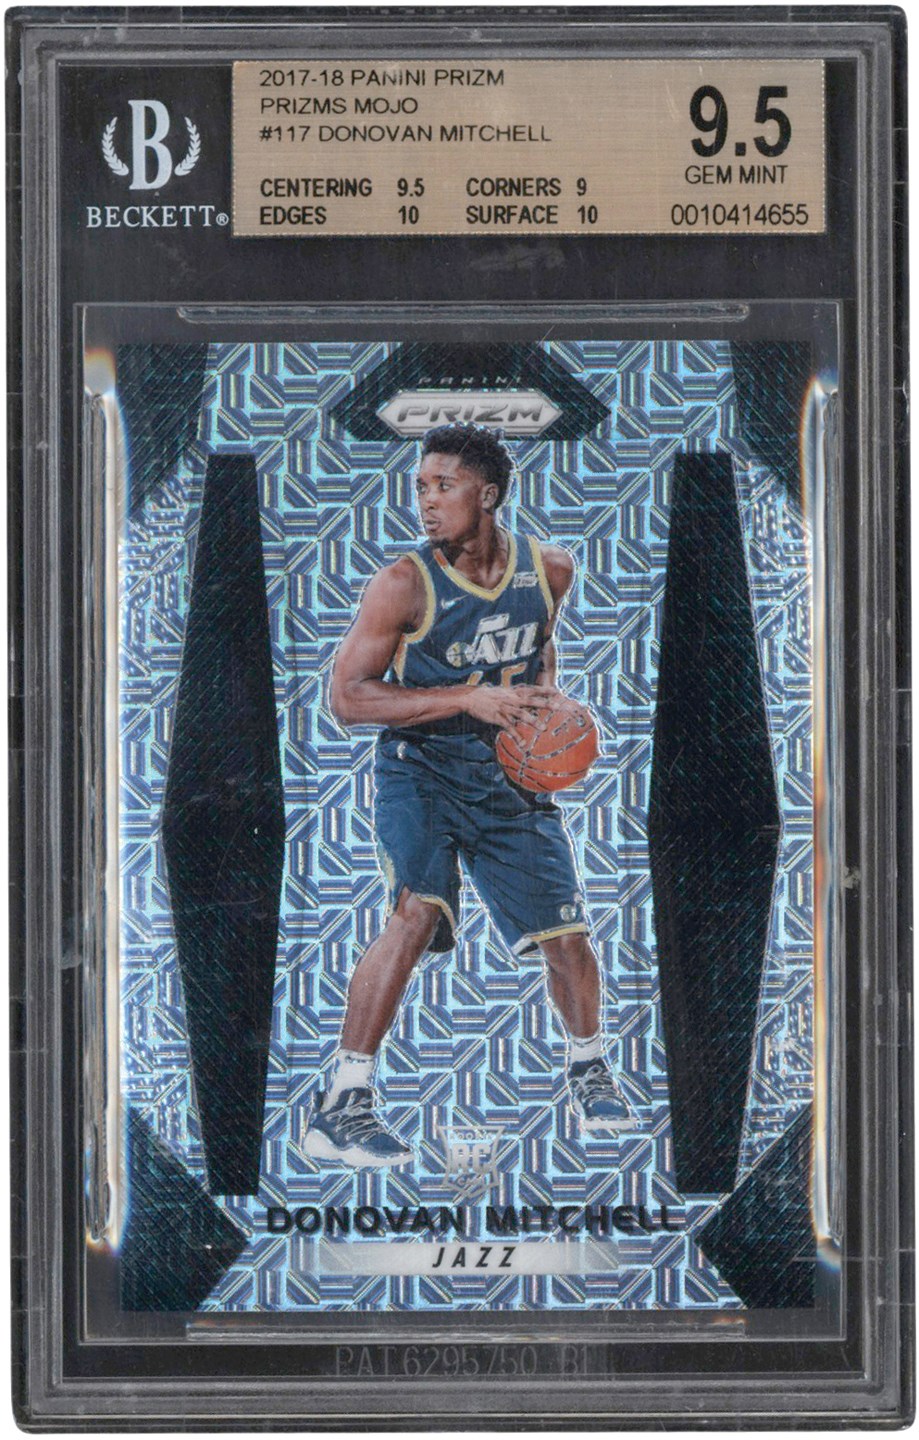 Basketball Cards - 2017-18 Panini Prizm Basketball Mojo #117 Donovan Mitchell Rookie Card #1/25 BGS GEM MINT 9.5 (Two 10 Subs!)